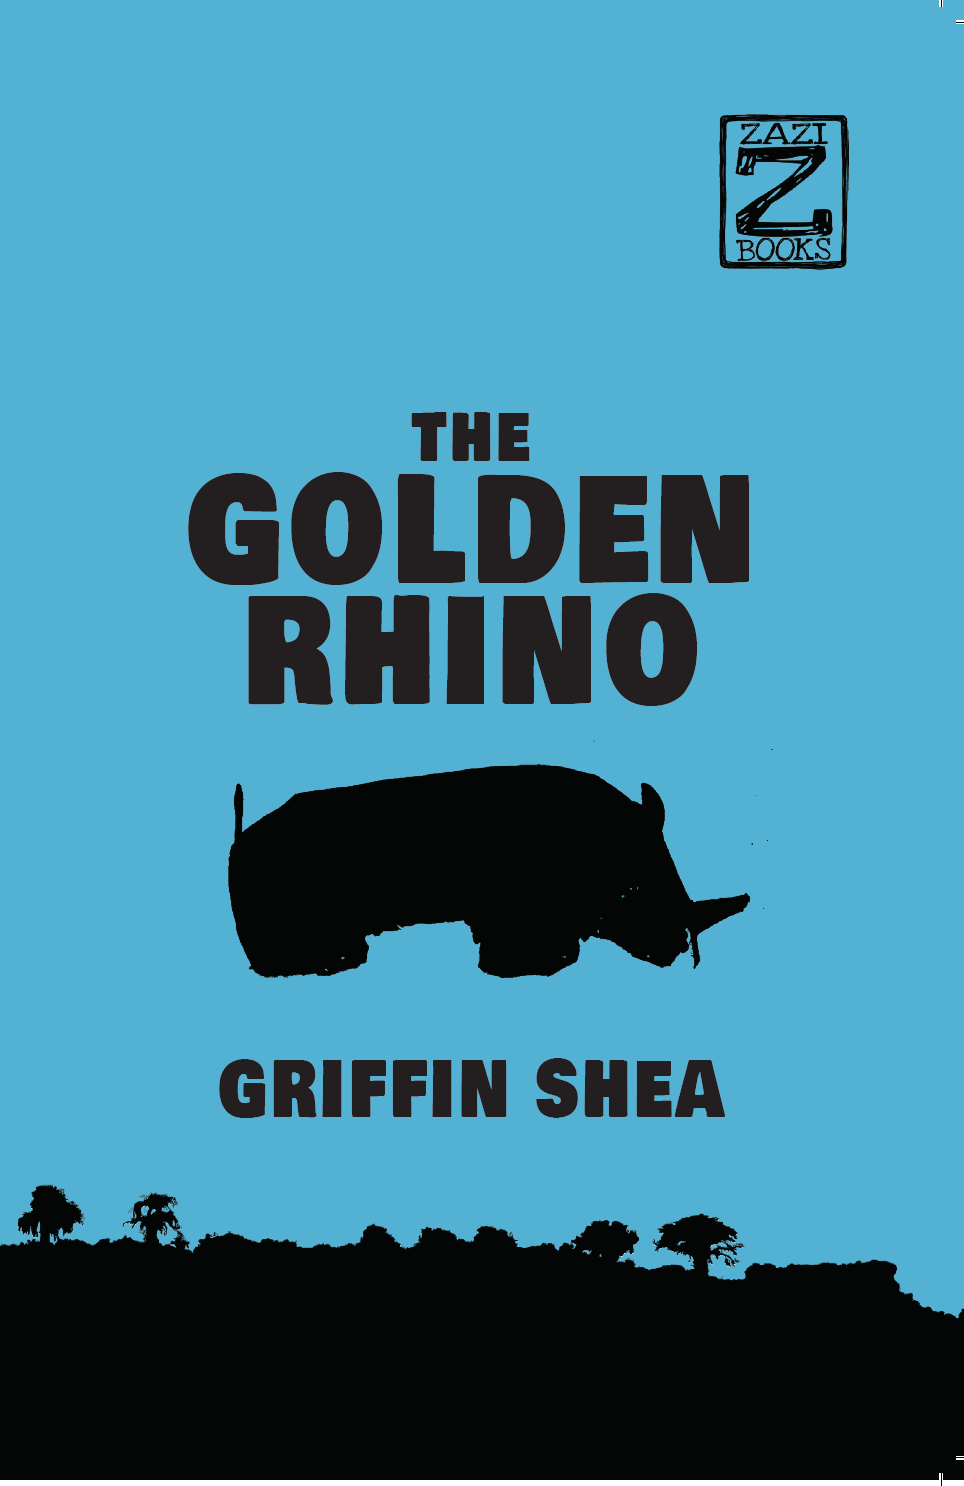 The Golden Rhino, by Griffin Shea